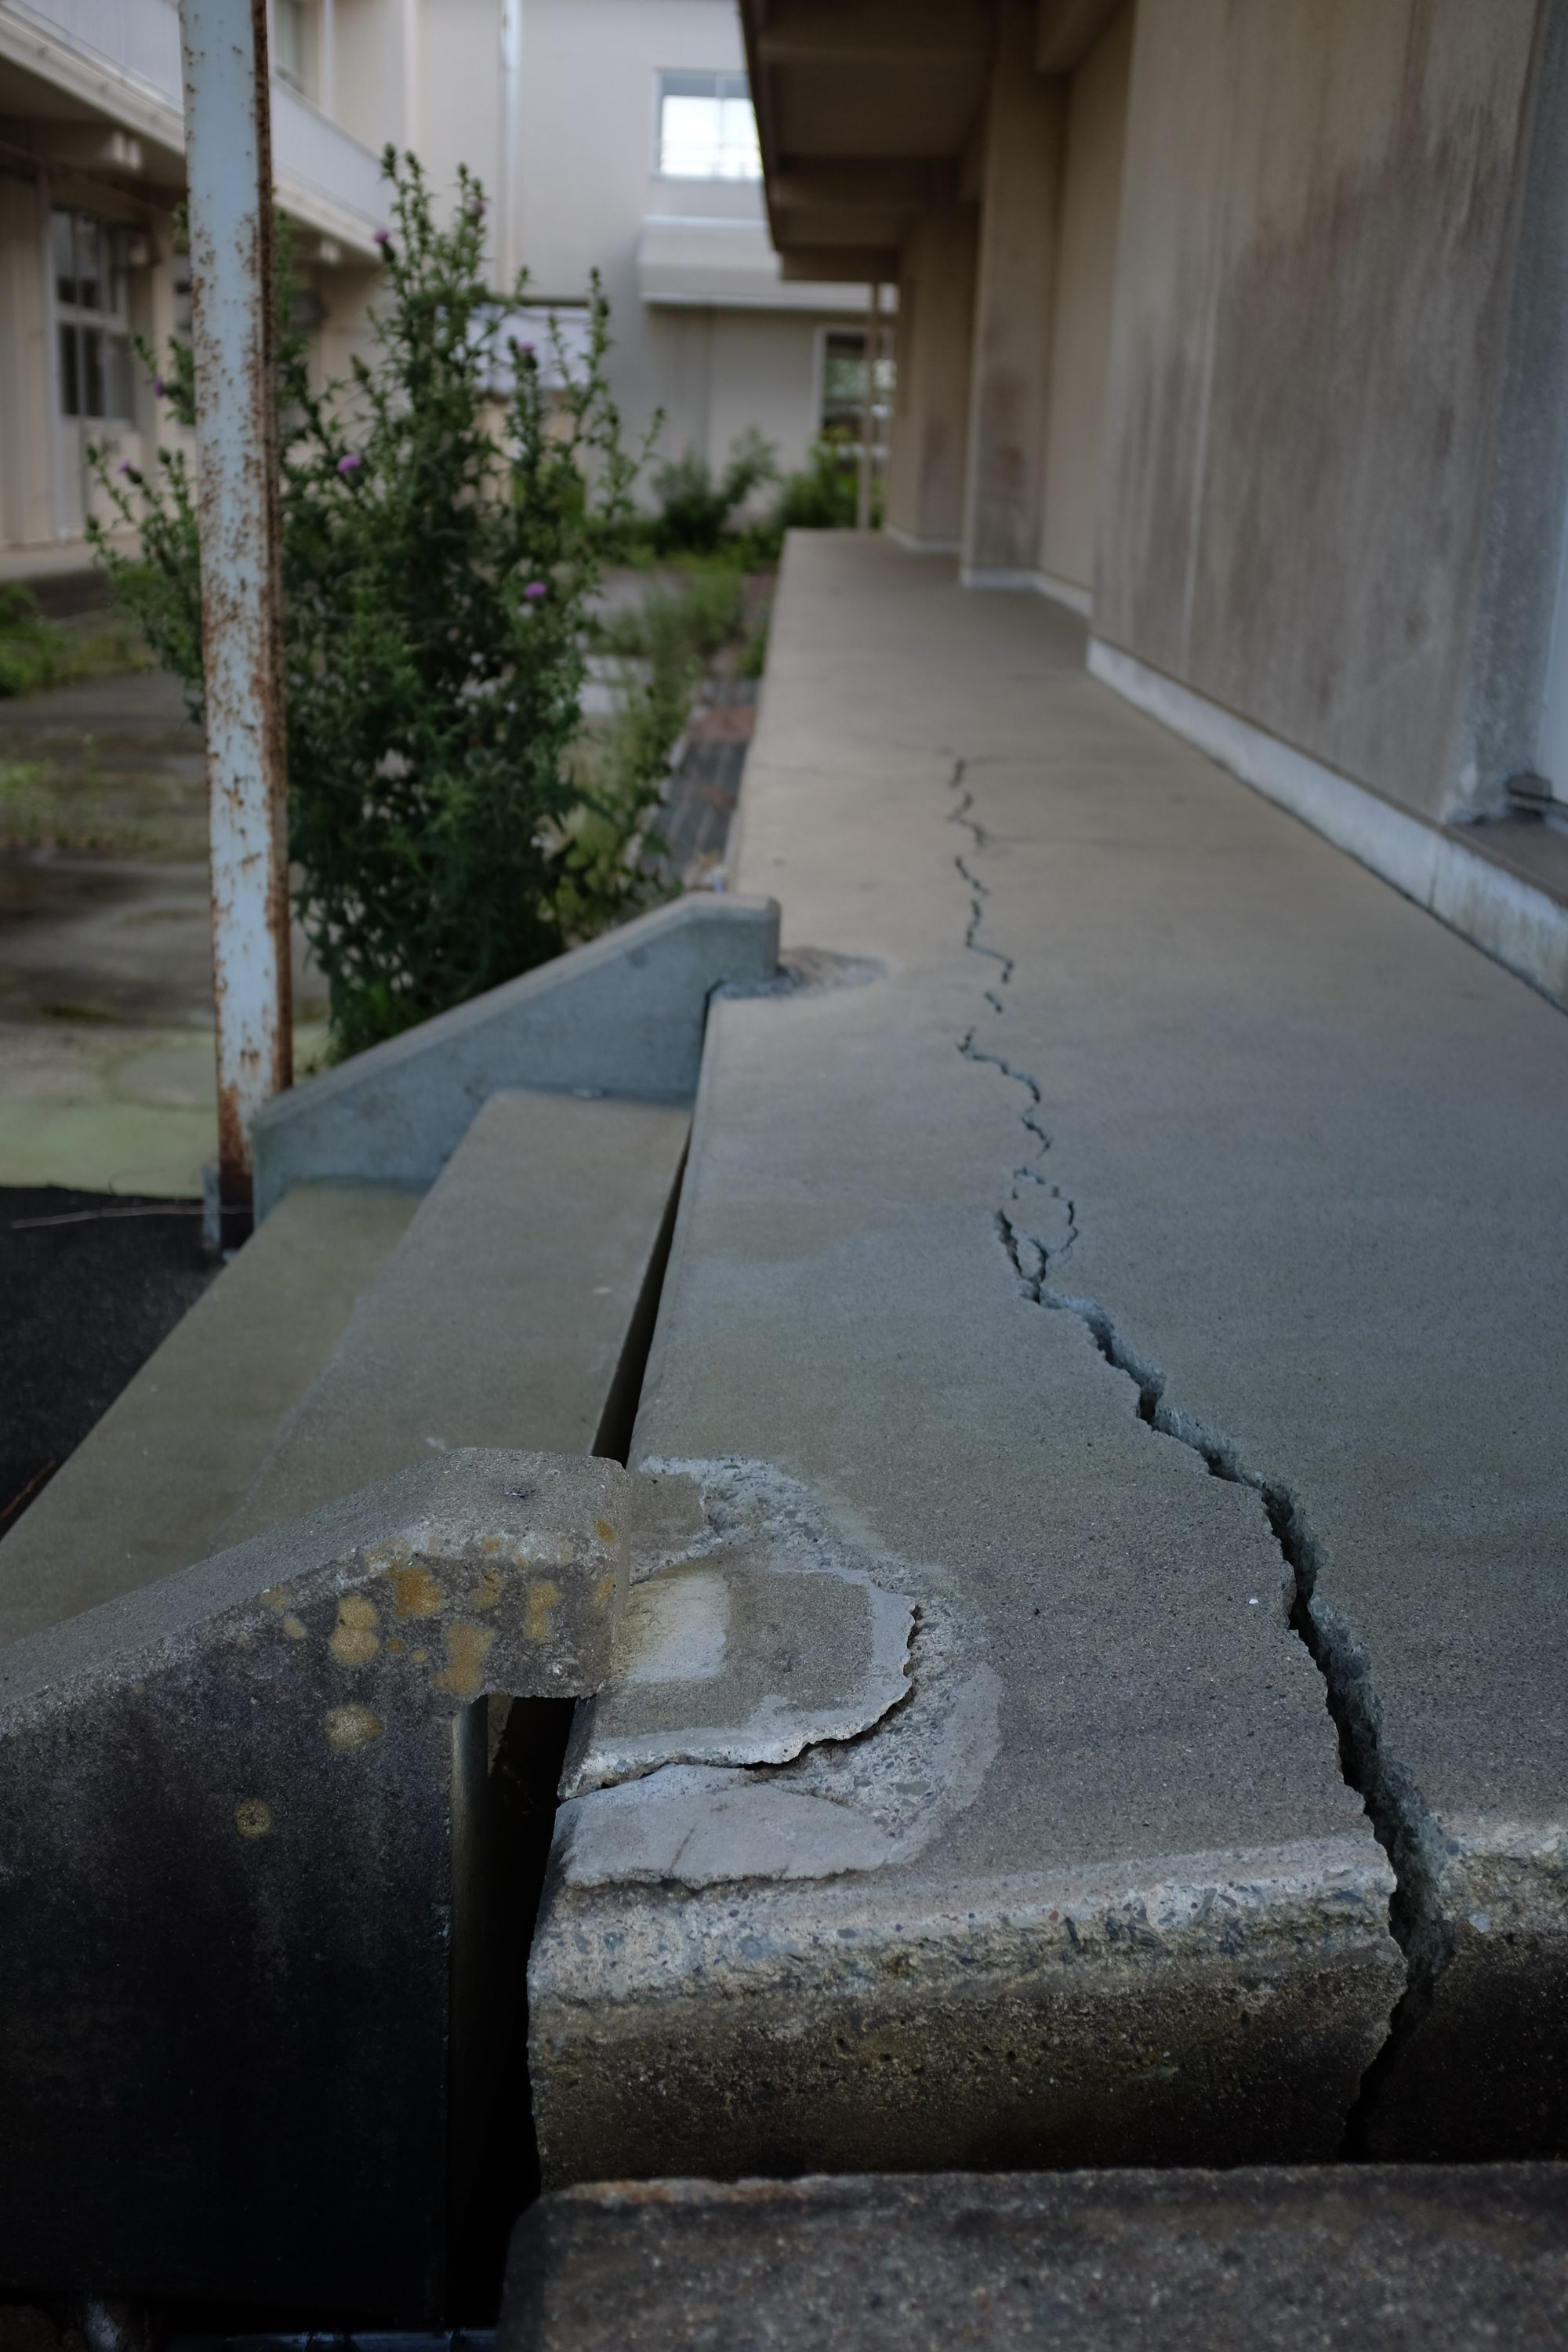 The cracked concrete porch of a school.